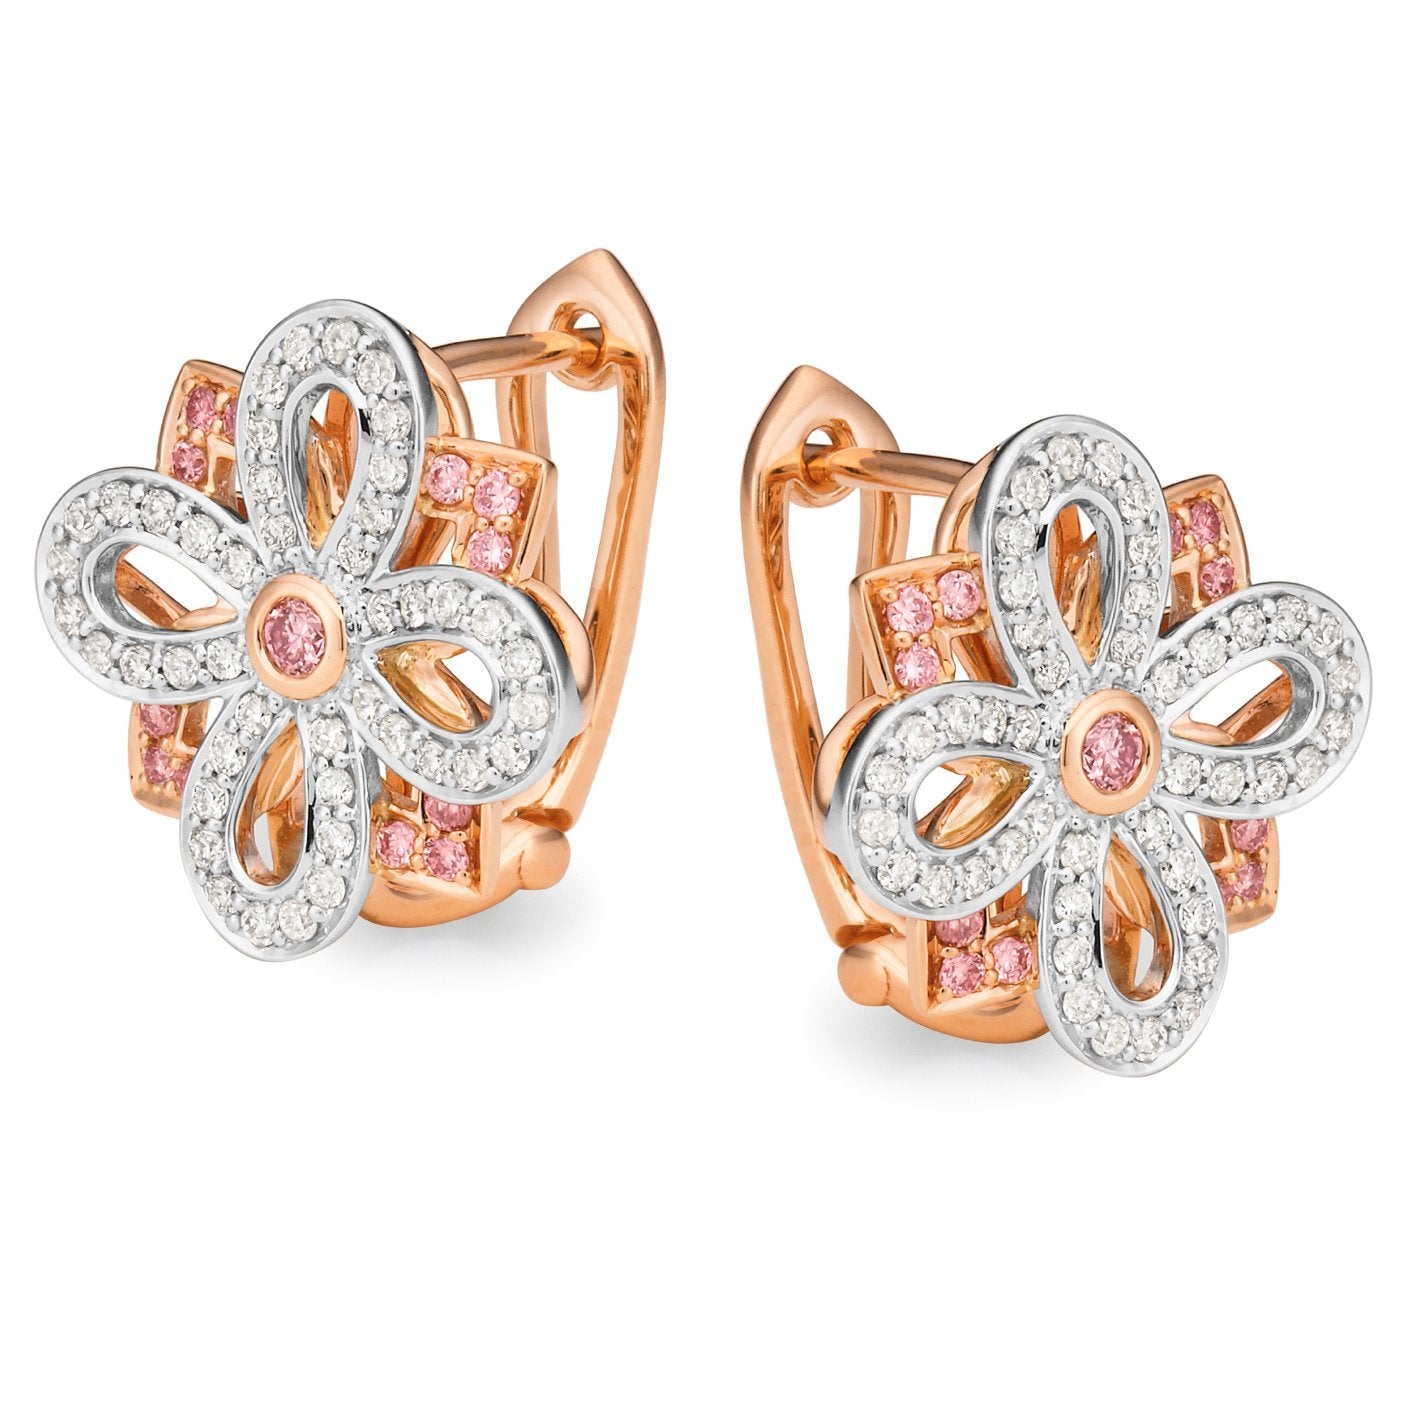 PINK CAVIAR 0.60ct Pink Diamond Earrings in 9ct Rose & White Gold